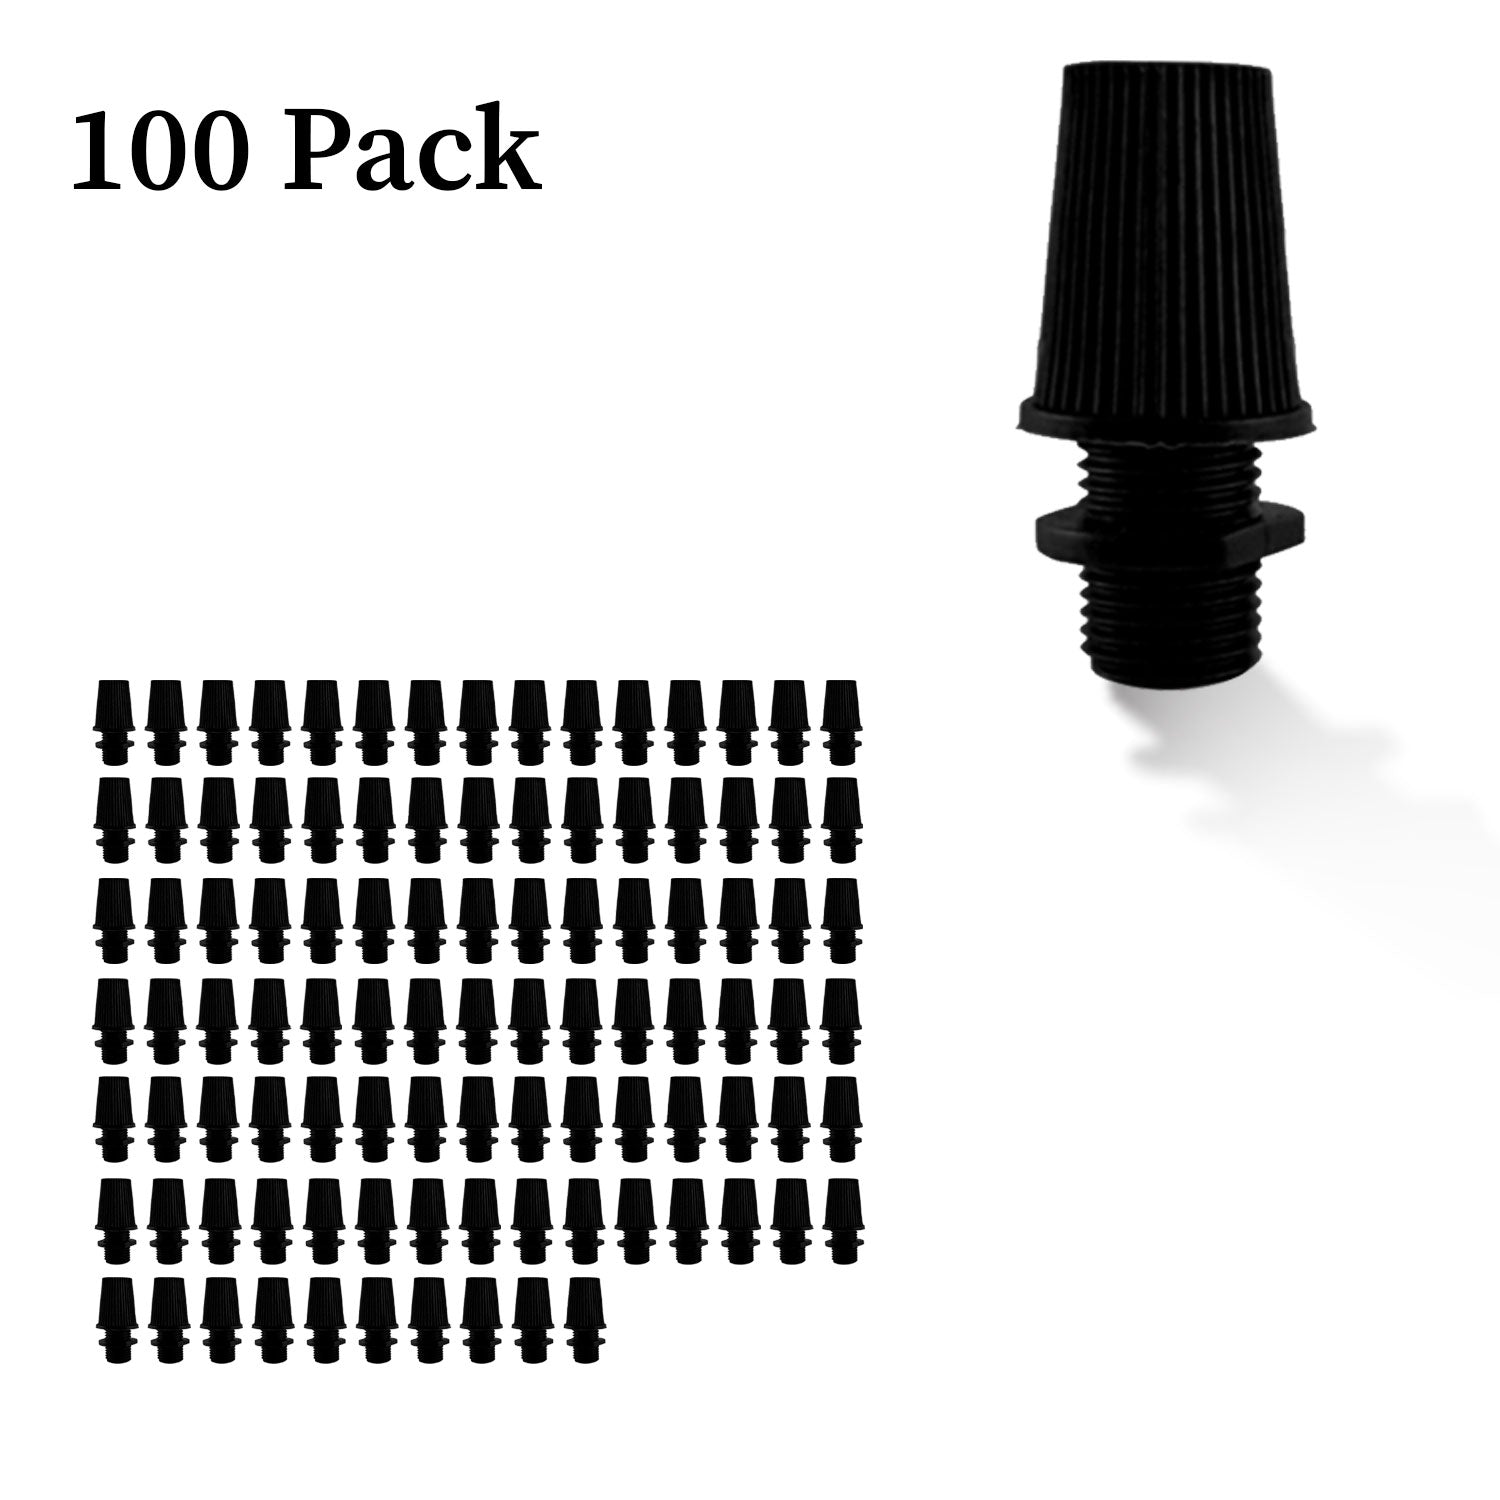 100 pack 100mm Black cable cord grip lock